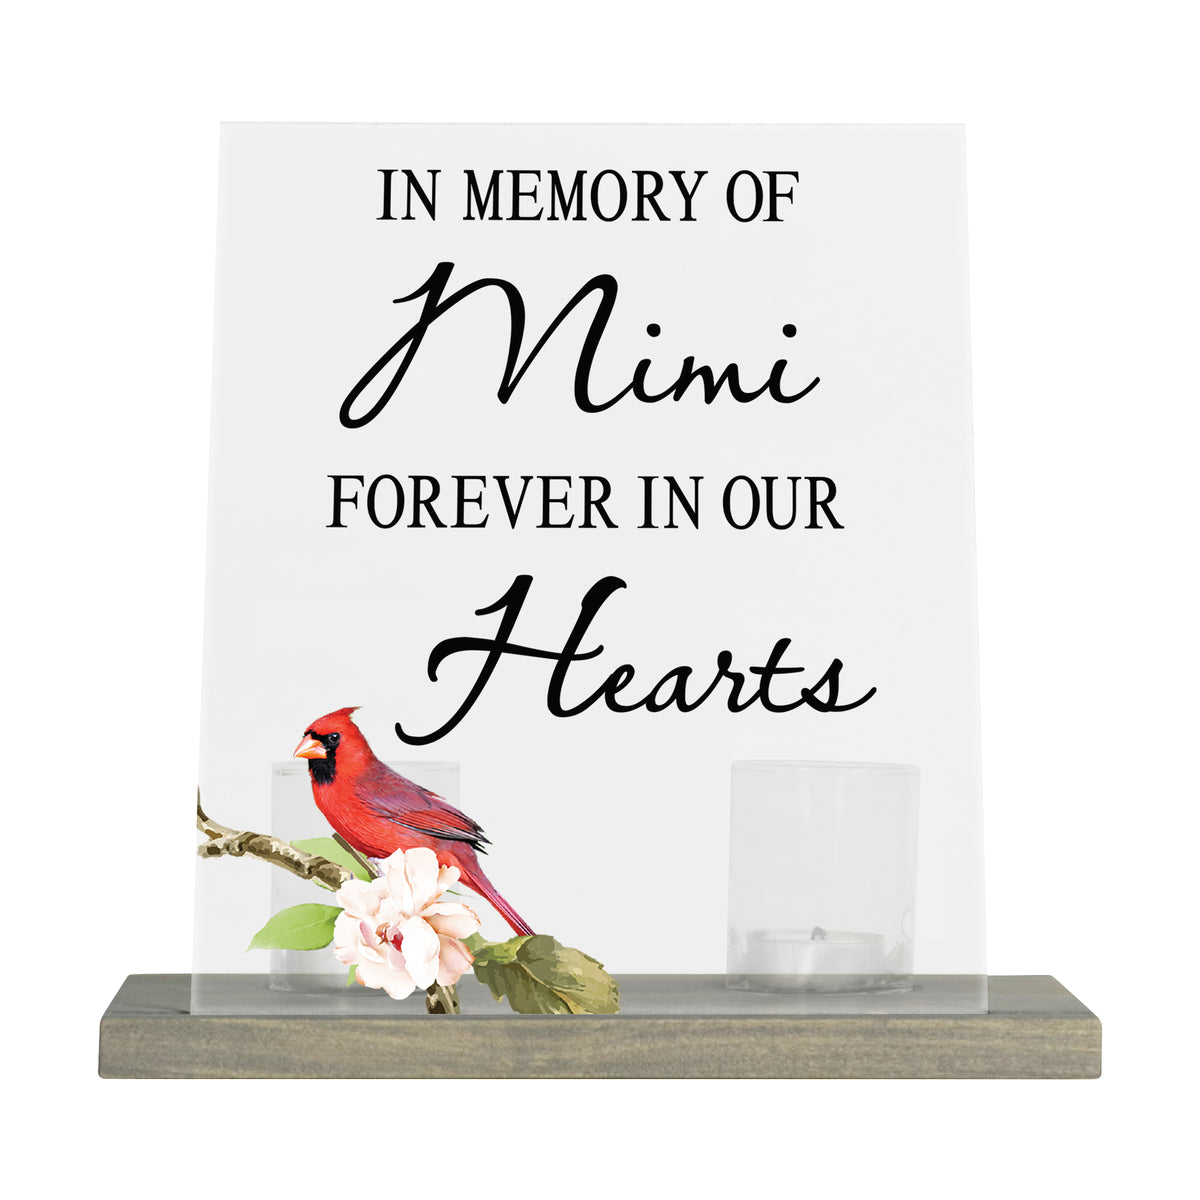 LifeSong Memorials Vintage Memorial Cardinal Acrylic Sign Candle Holder With Wood Base And Glass Votives For Home Decor | In Memory Of Mimi. Acrylic candle holders, Vintage acrylic candle holders, glass candle holders for Living Room, Bedroom, Kitchen, Dining Room, and Entryways decor perfect memorial bereavement keepsake gift ideas for Family &amp; Friends.